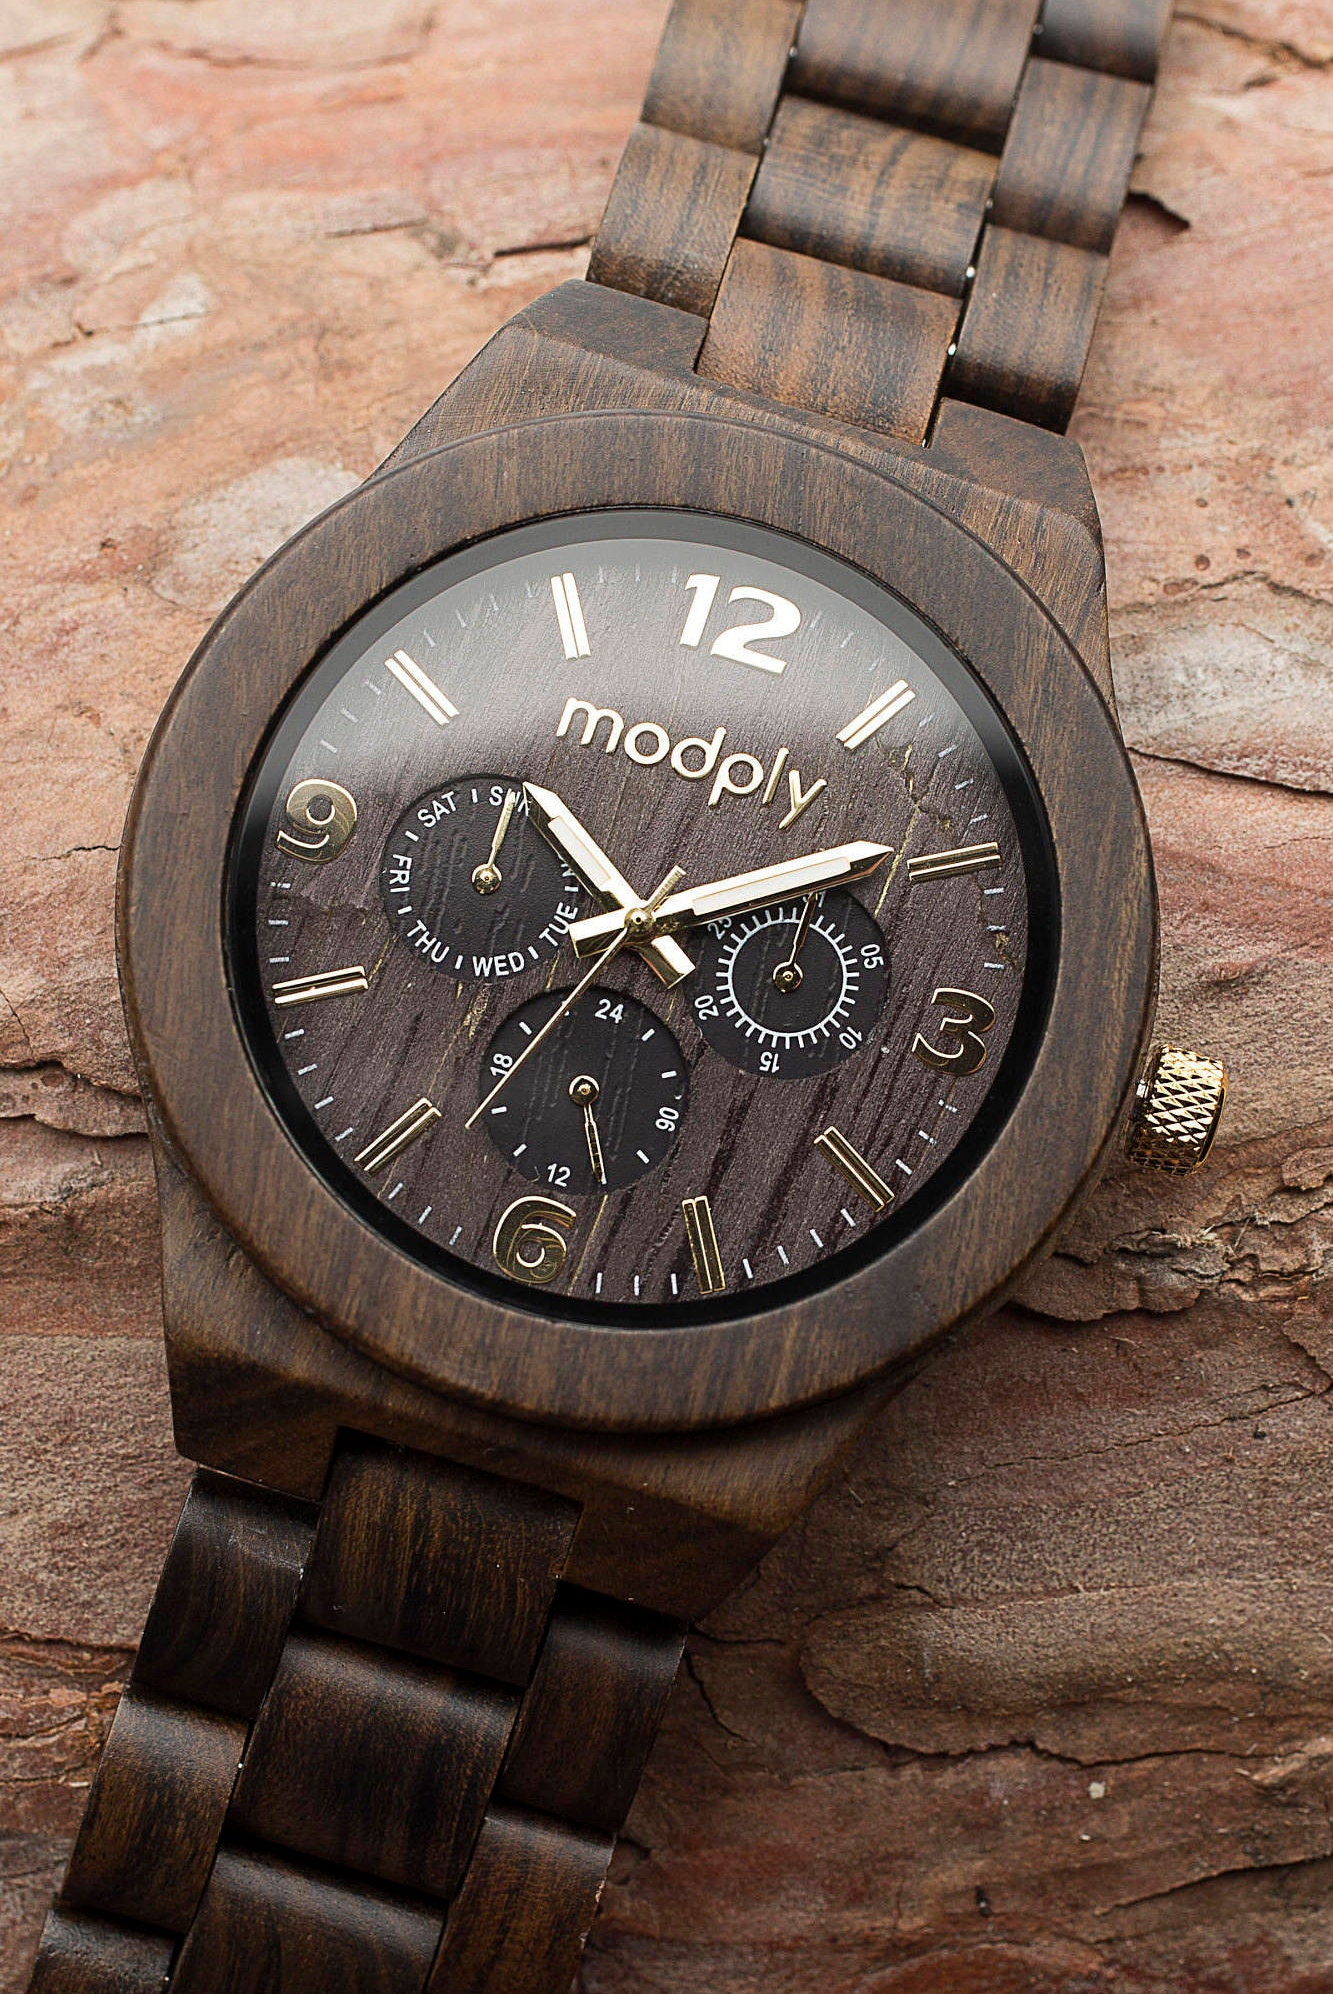 Personalized Men's Wooden Watch - Engraved Custom Gift for Him